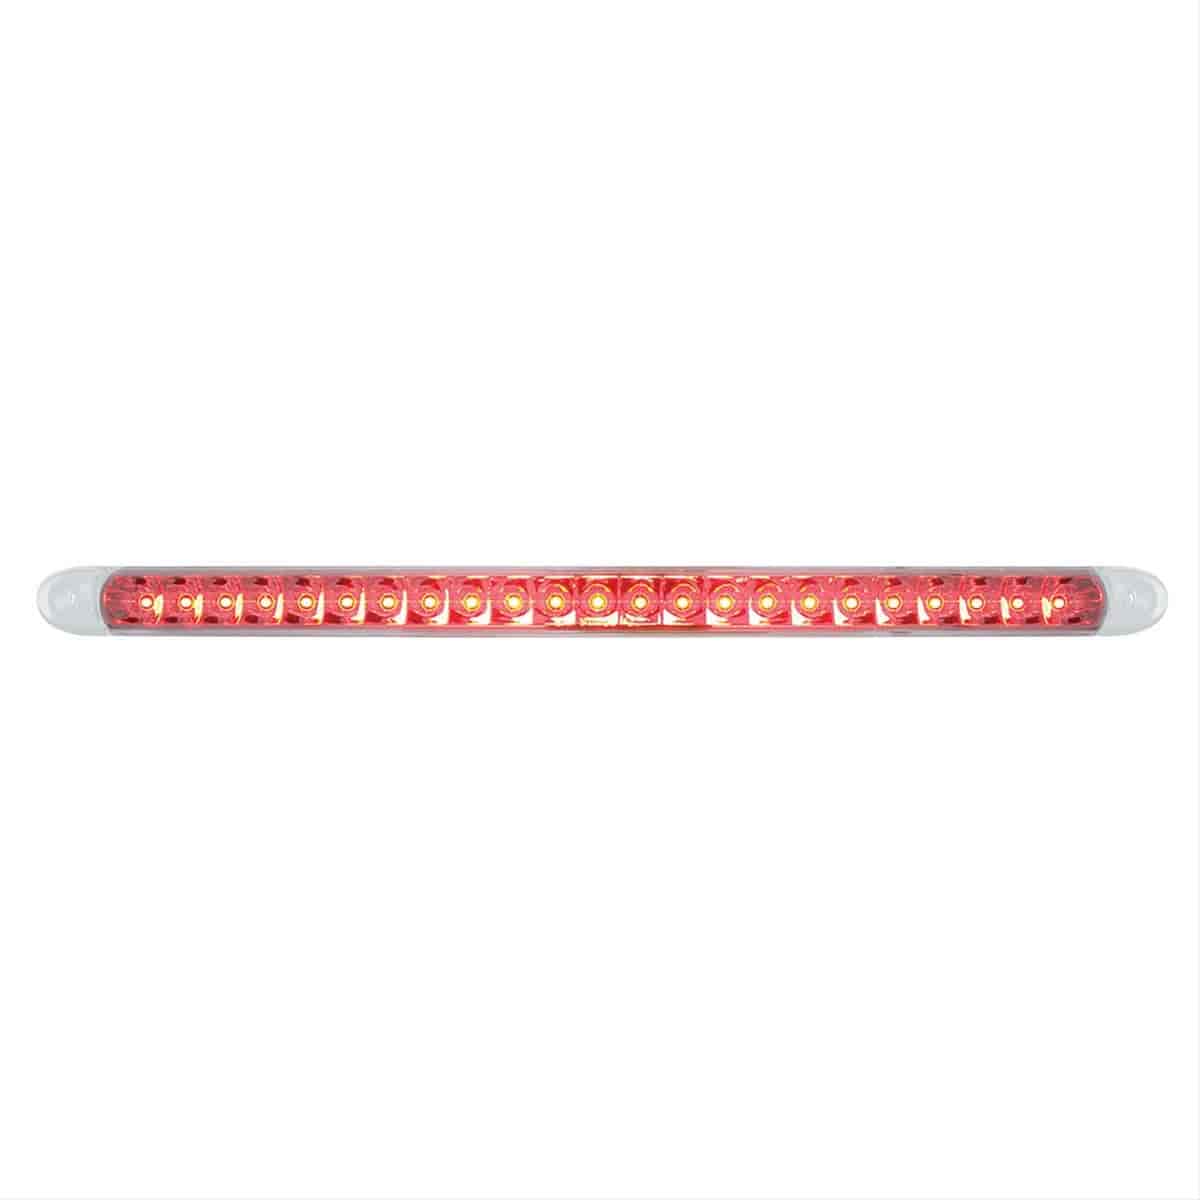 23 RED SMD LED 17 1/4 S/T